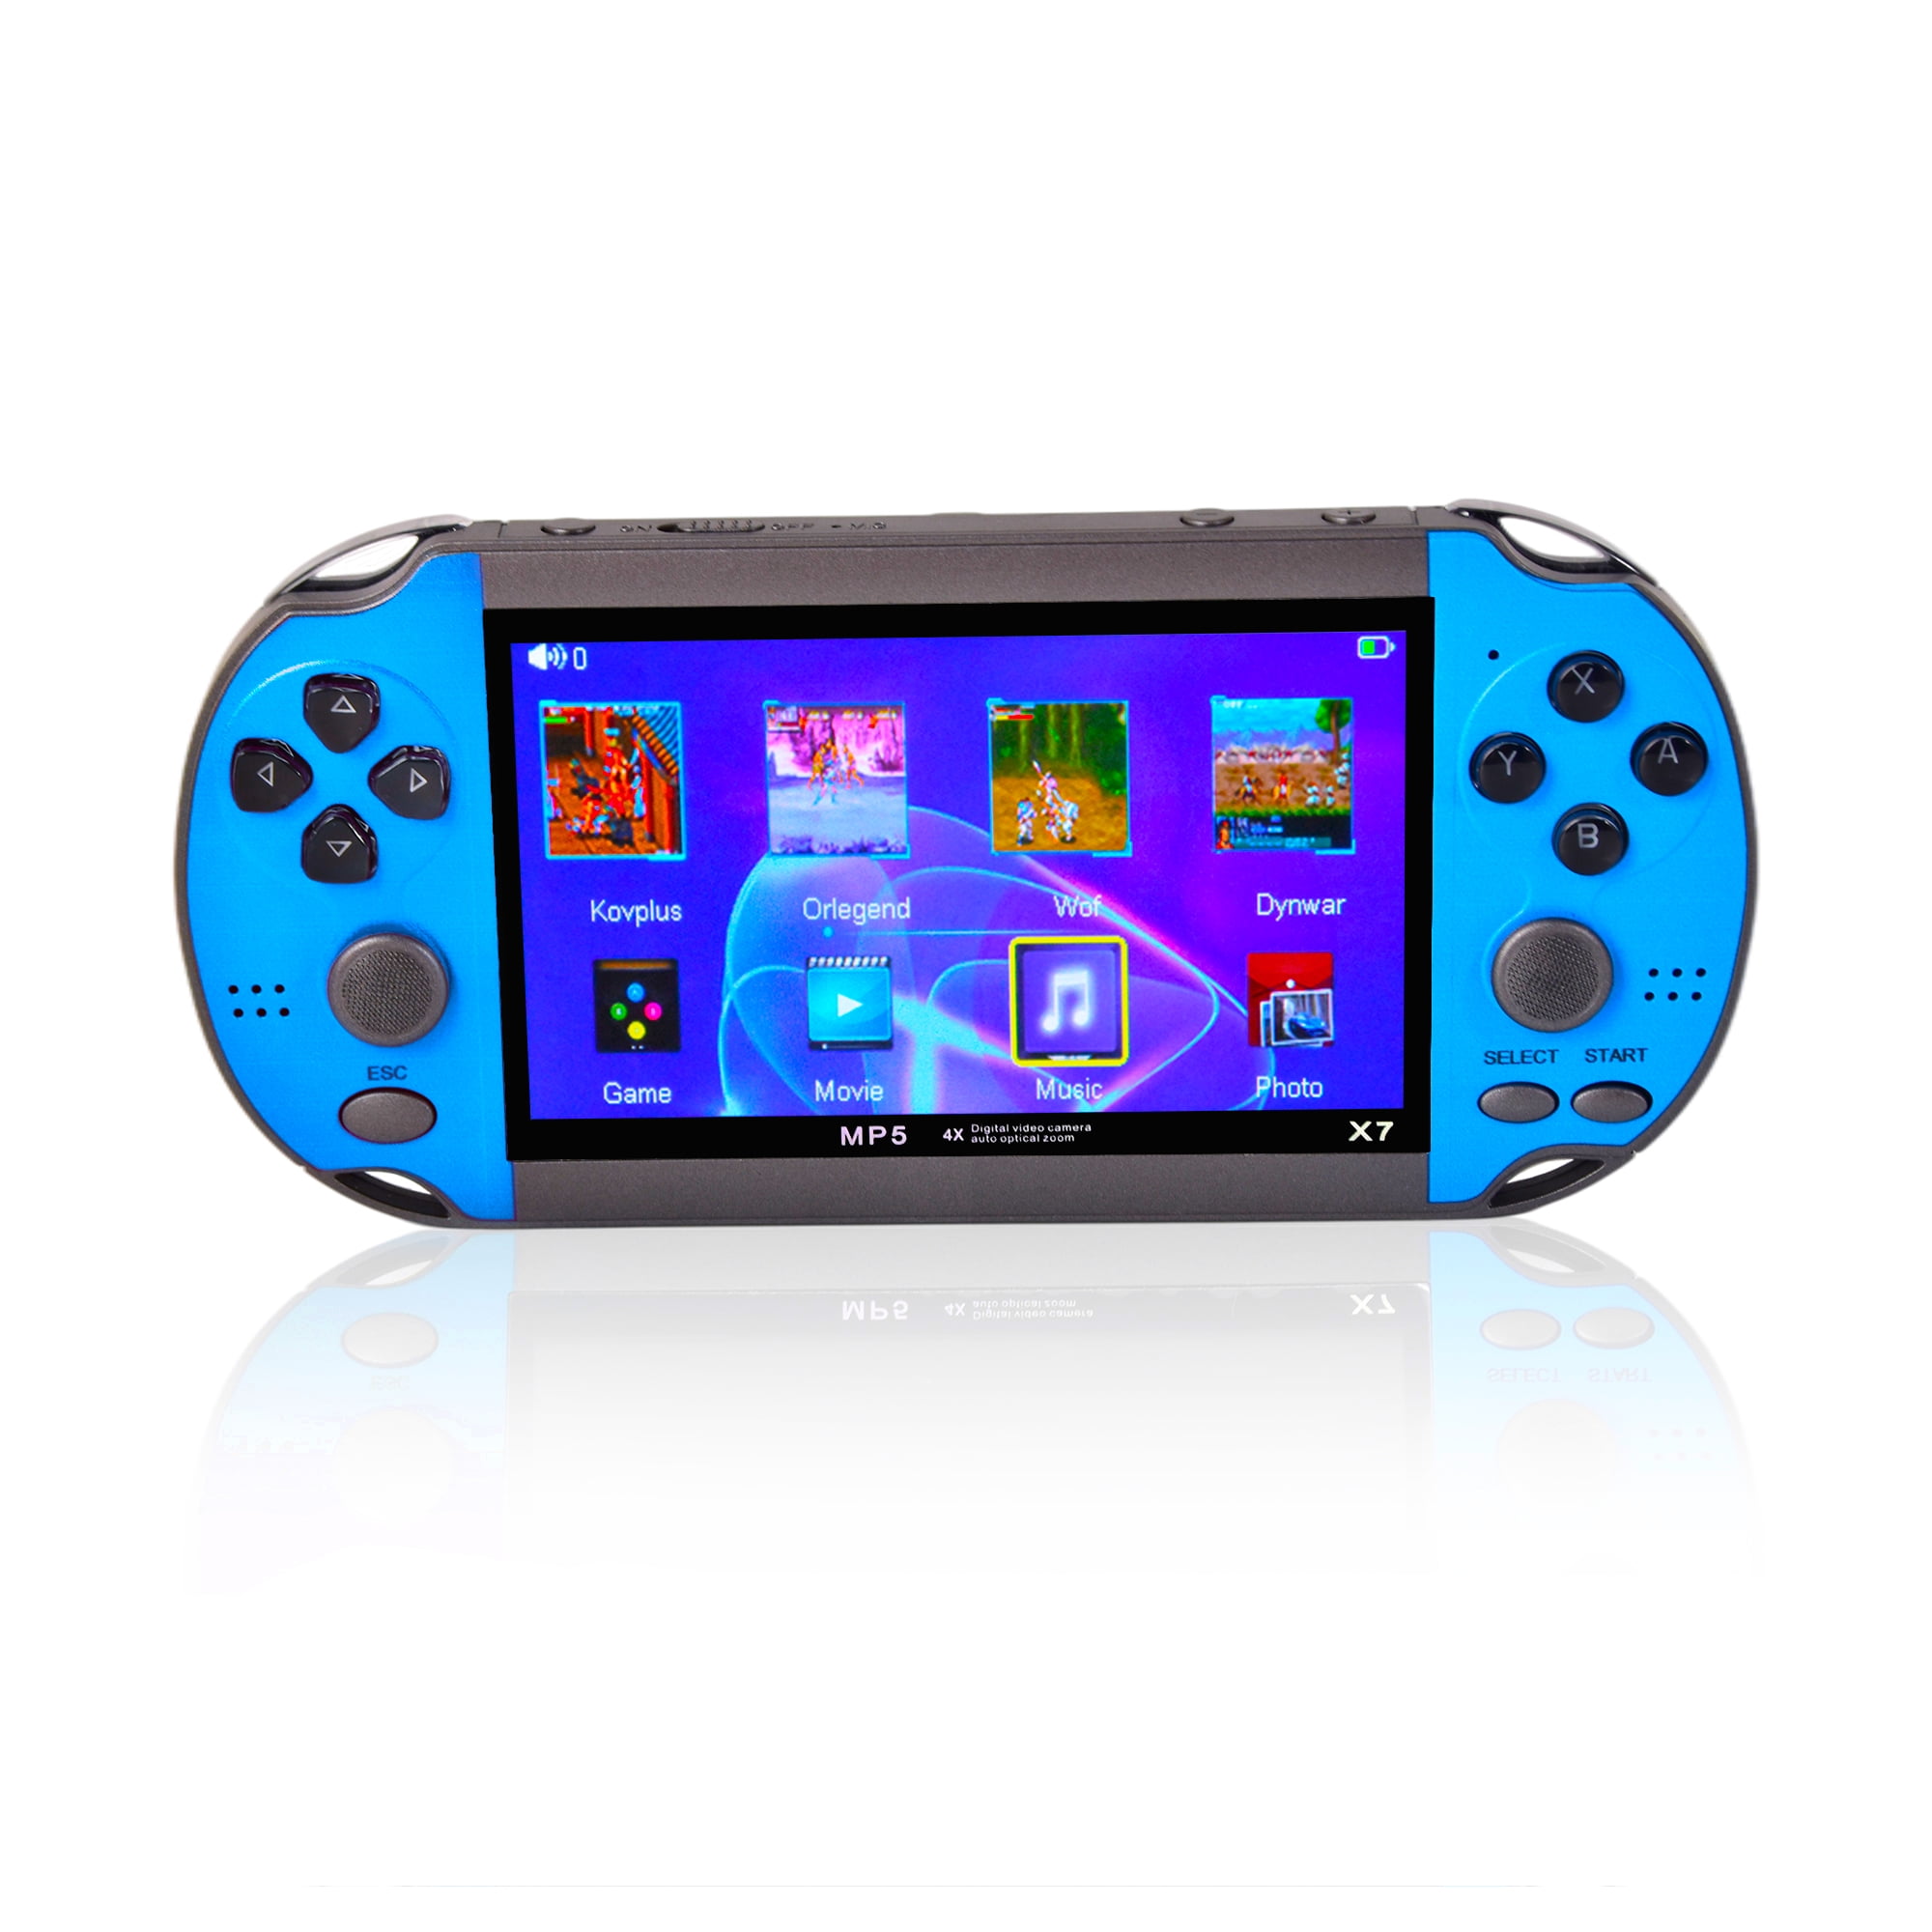  Sony Playstation Portable (PSP) 3000 Series Handheld Gaming  Console System - Blue (Renewed) : Video Games